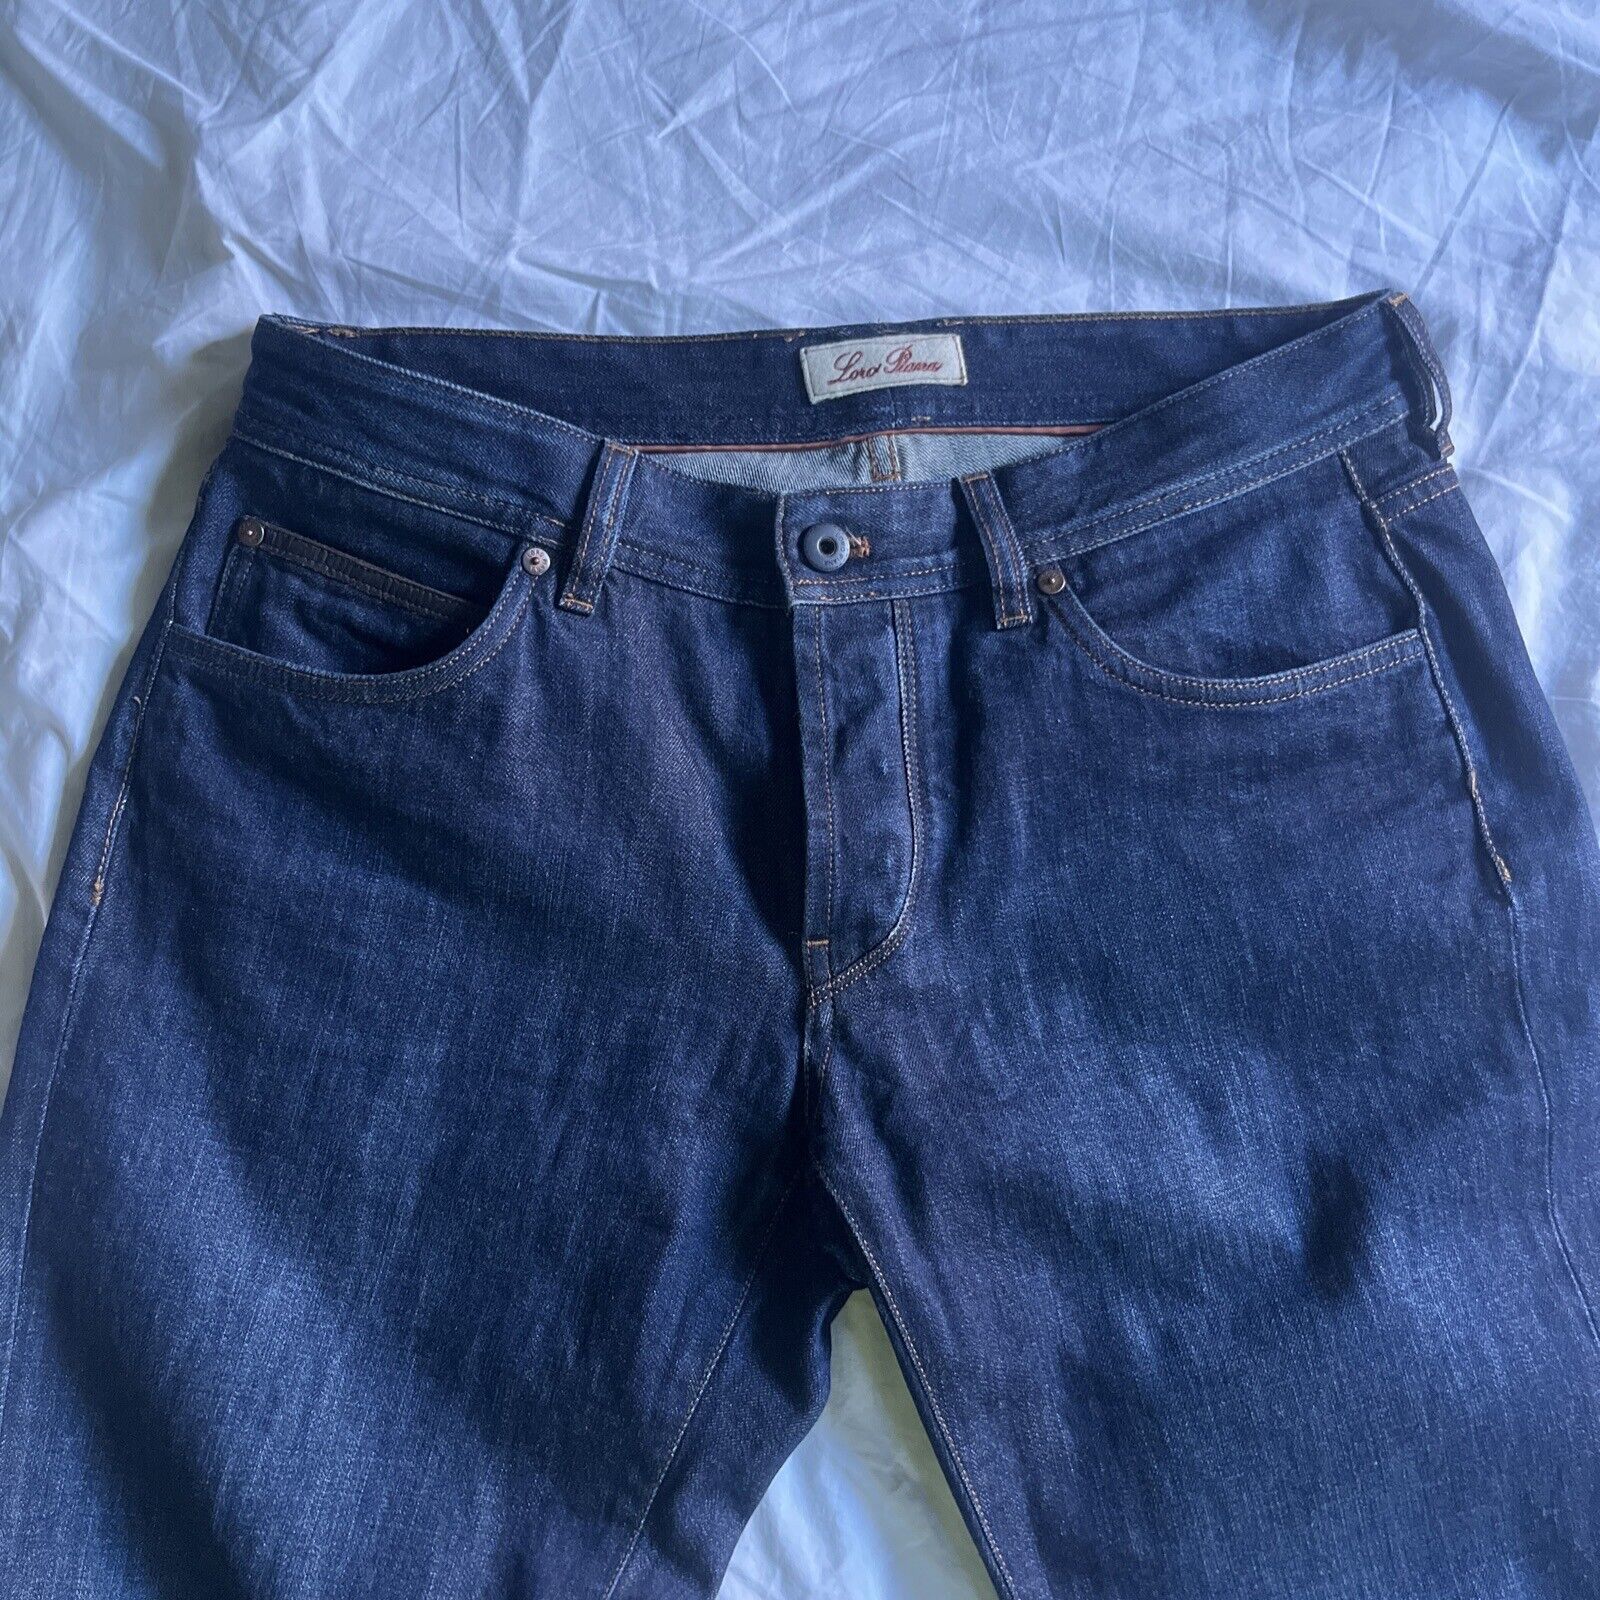 Loro Piana men’s jeans 35 - 5 Pocket Button Fly - Made In Italy - NWOT ...